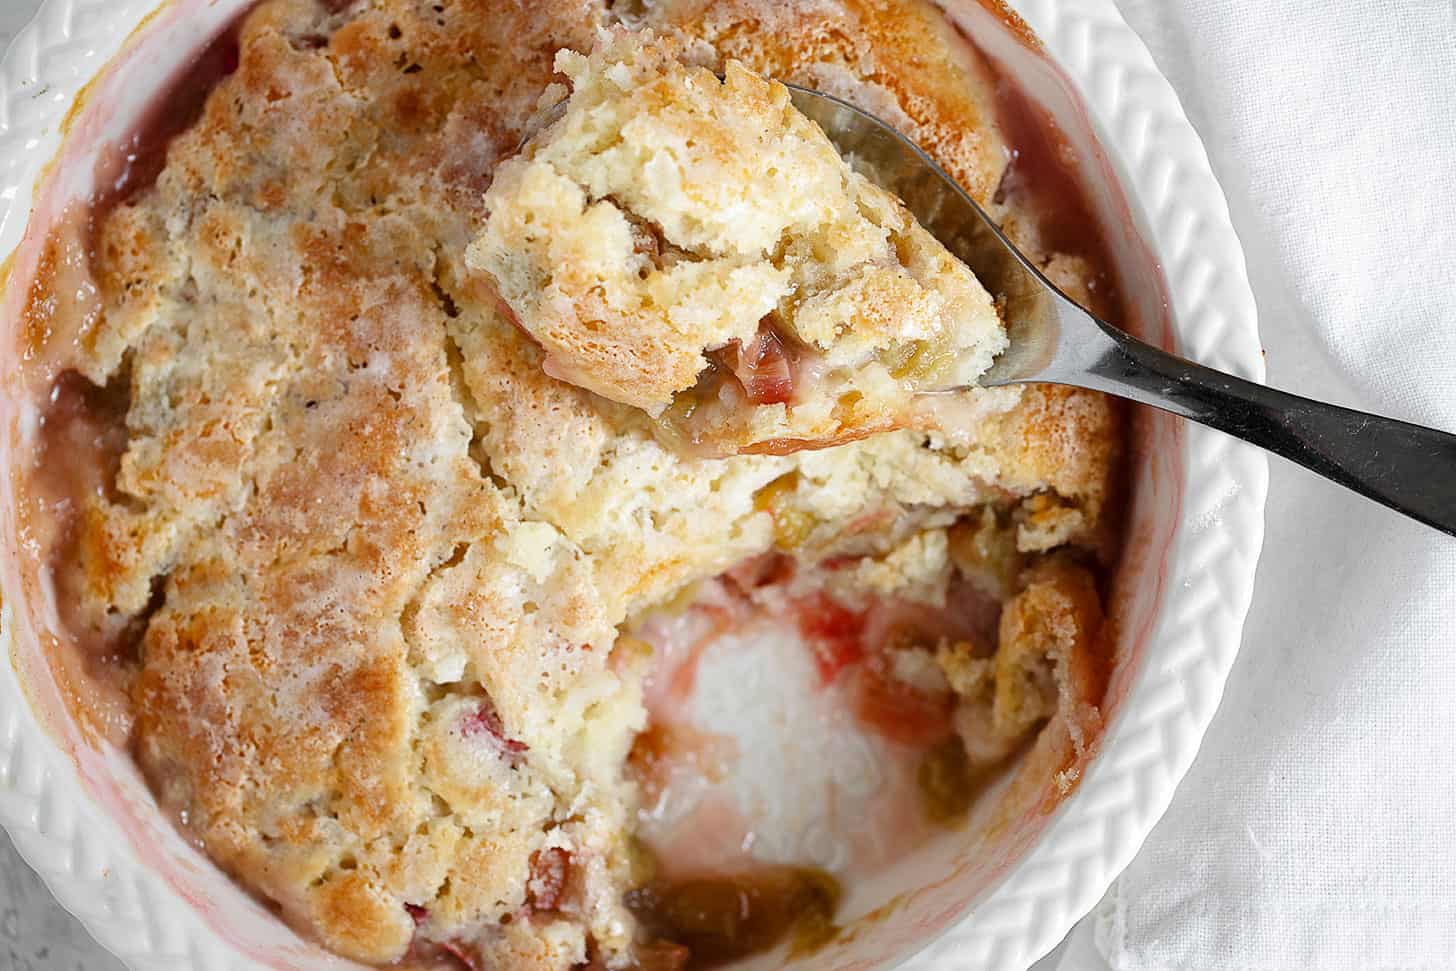 Rhubarb pudding cake in baking dish with spoon.